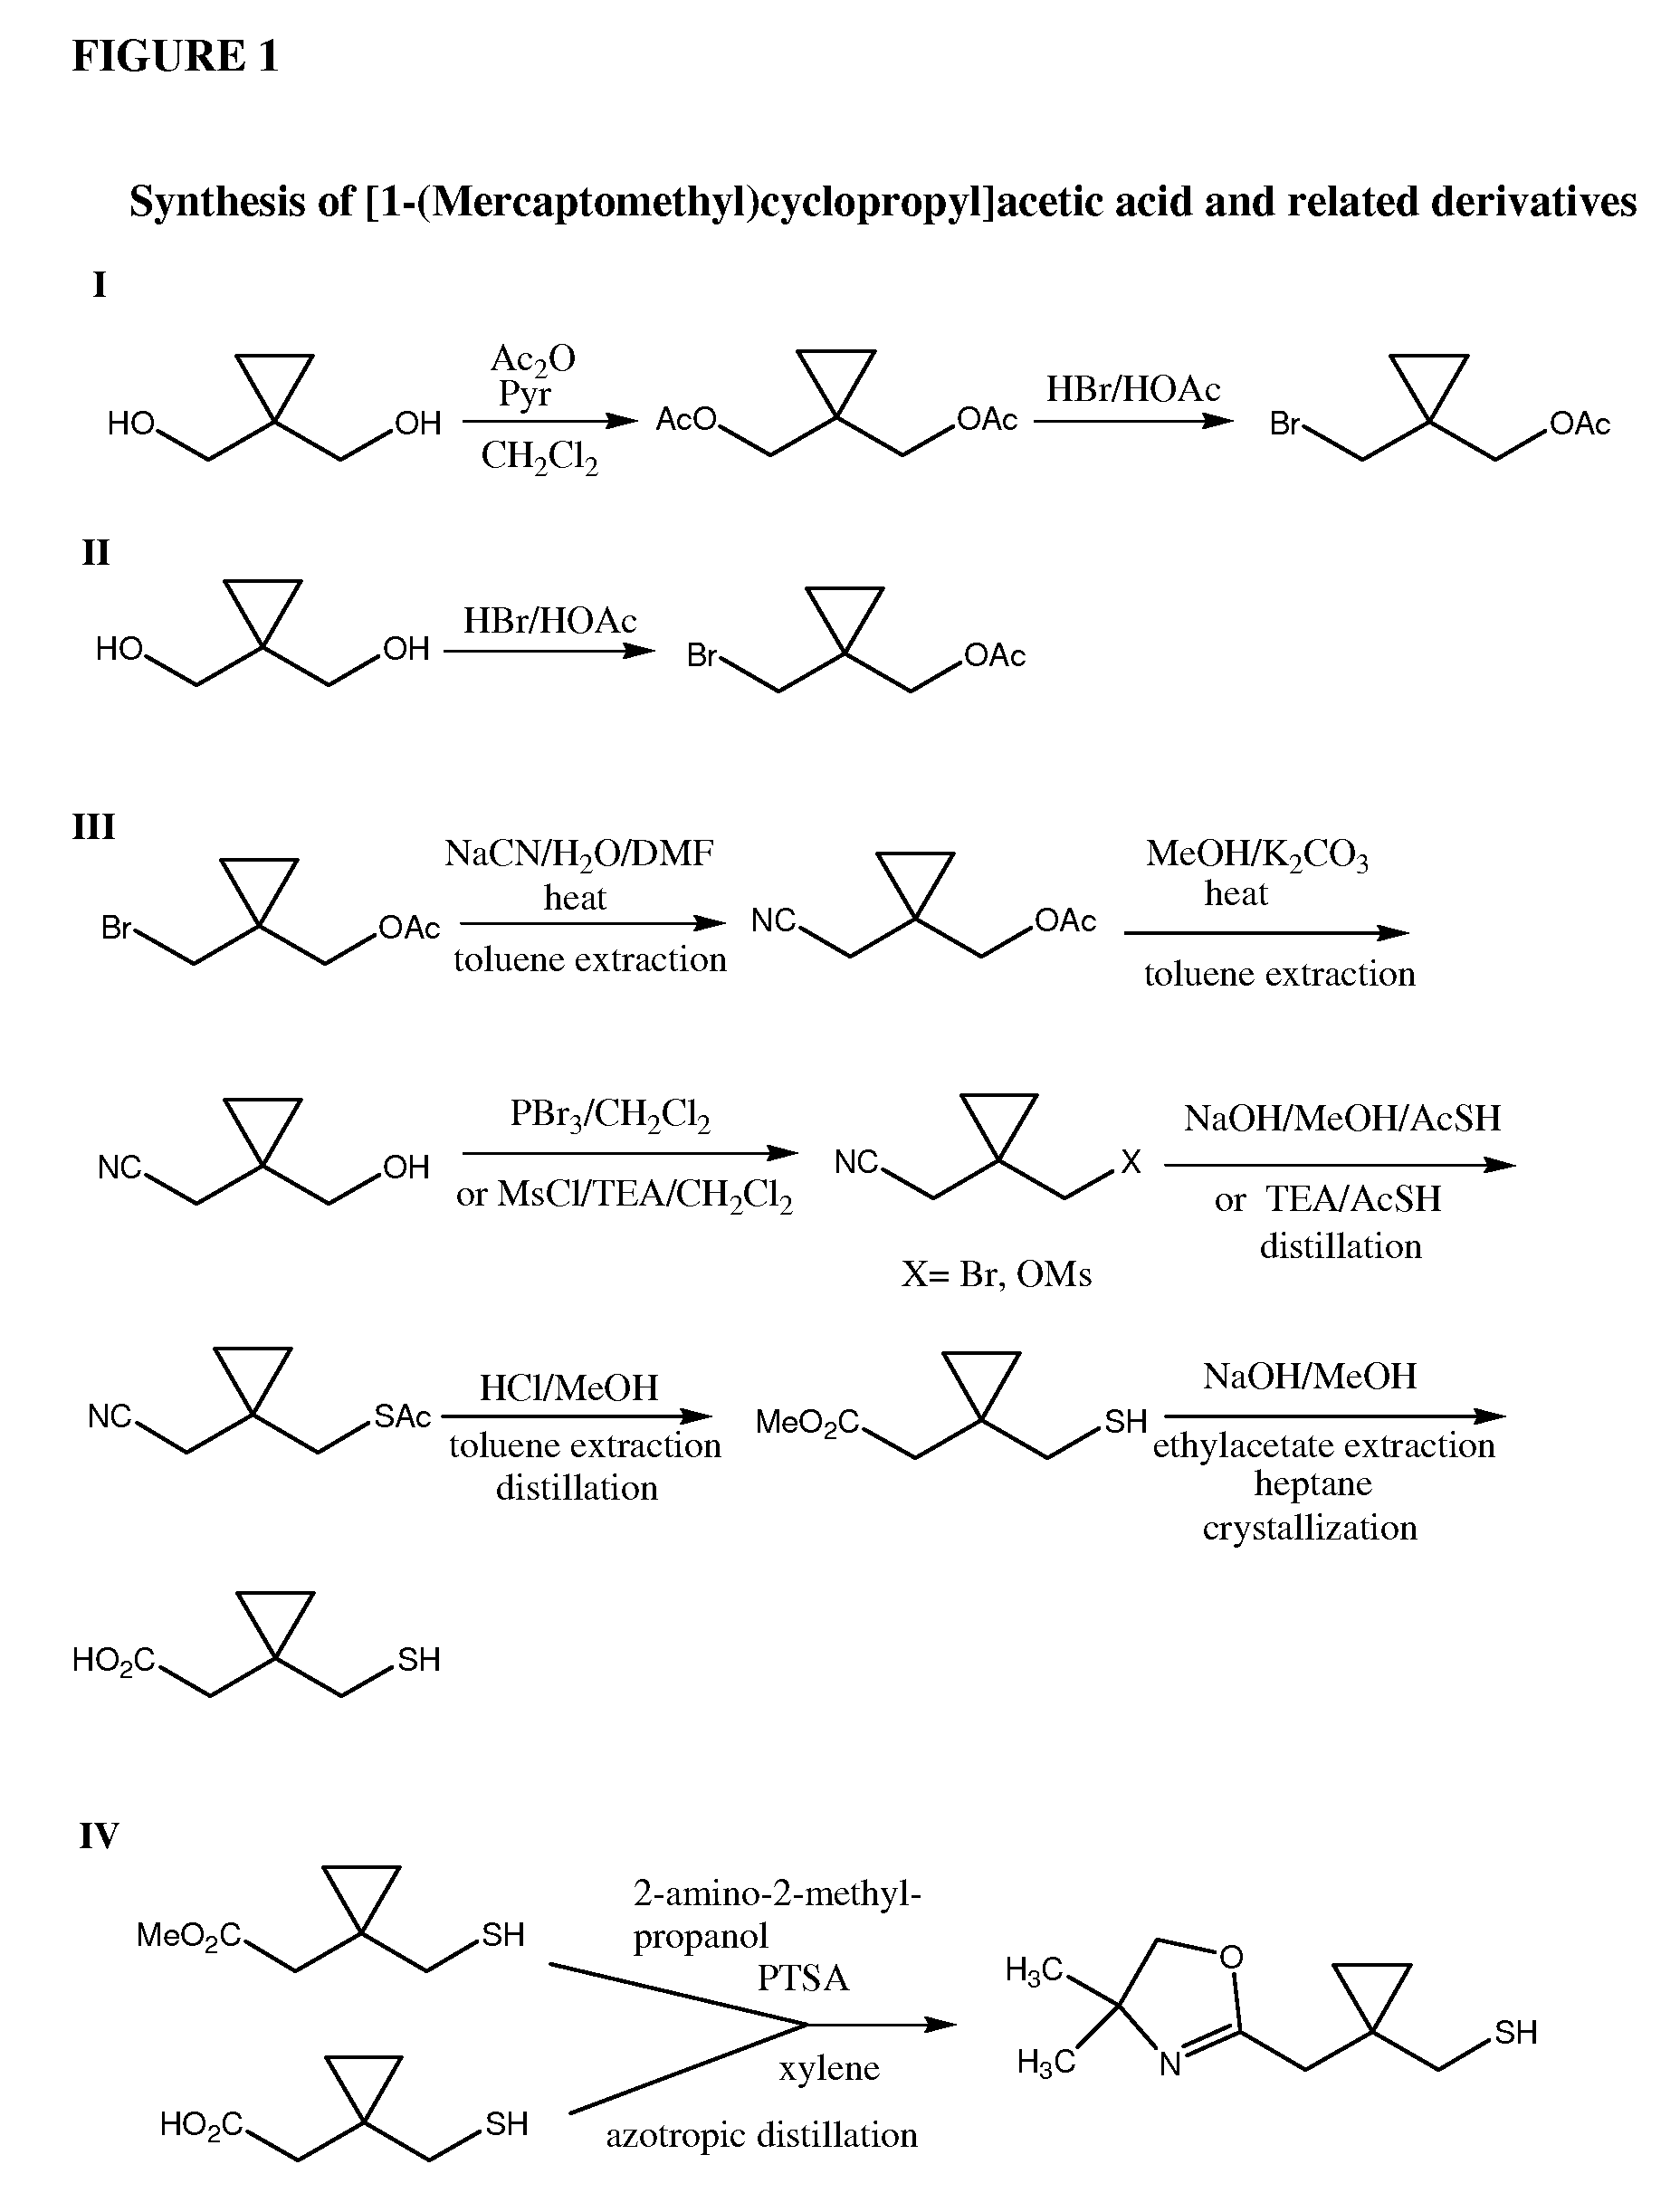 Process for preparation of [1-(mercaptomethyl)cyclopropyl]acetic acid and related derivatives